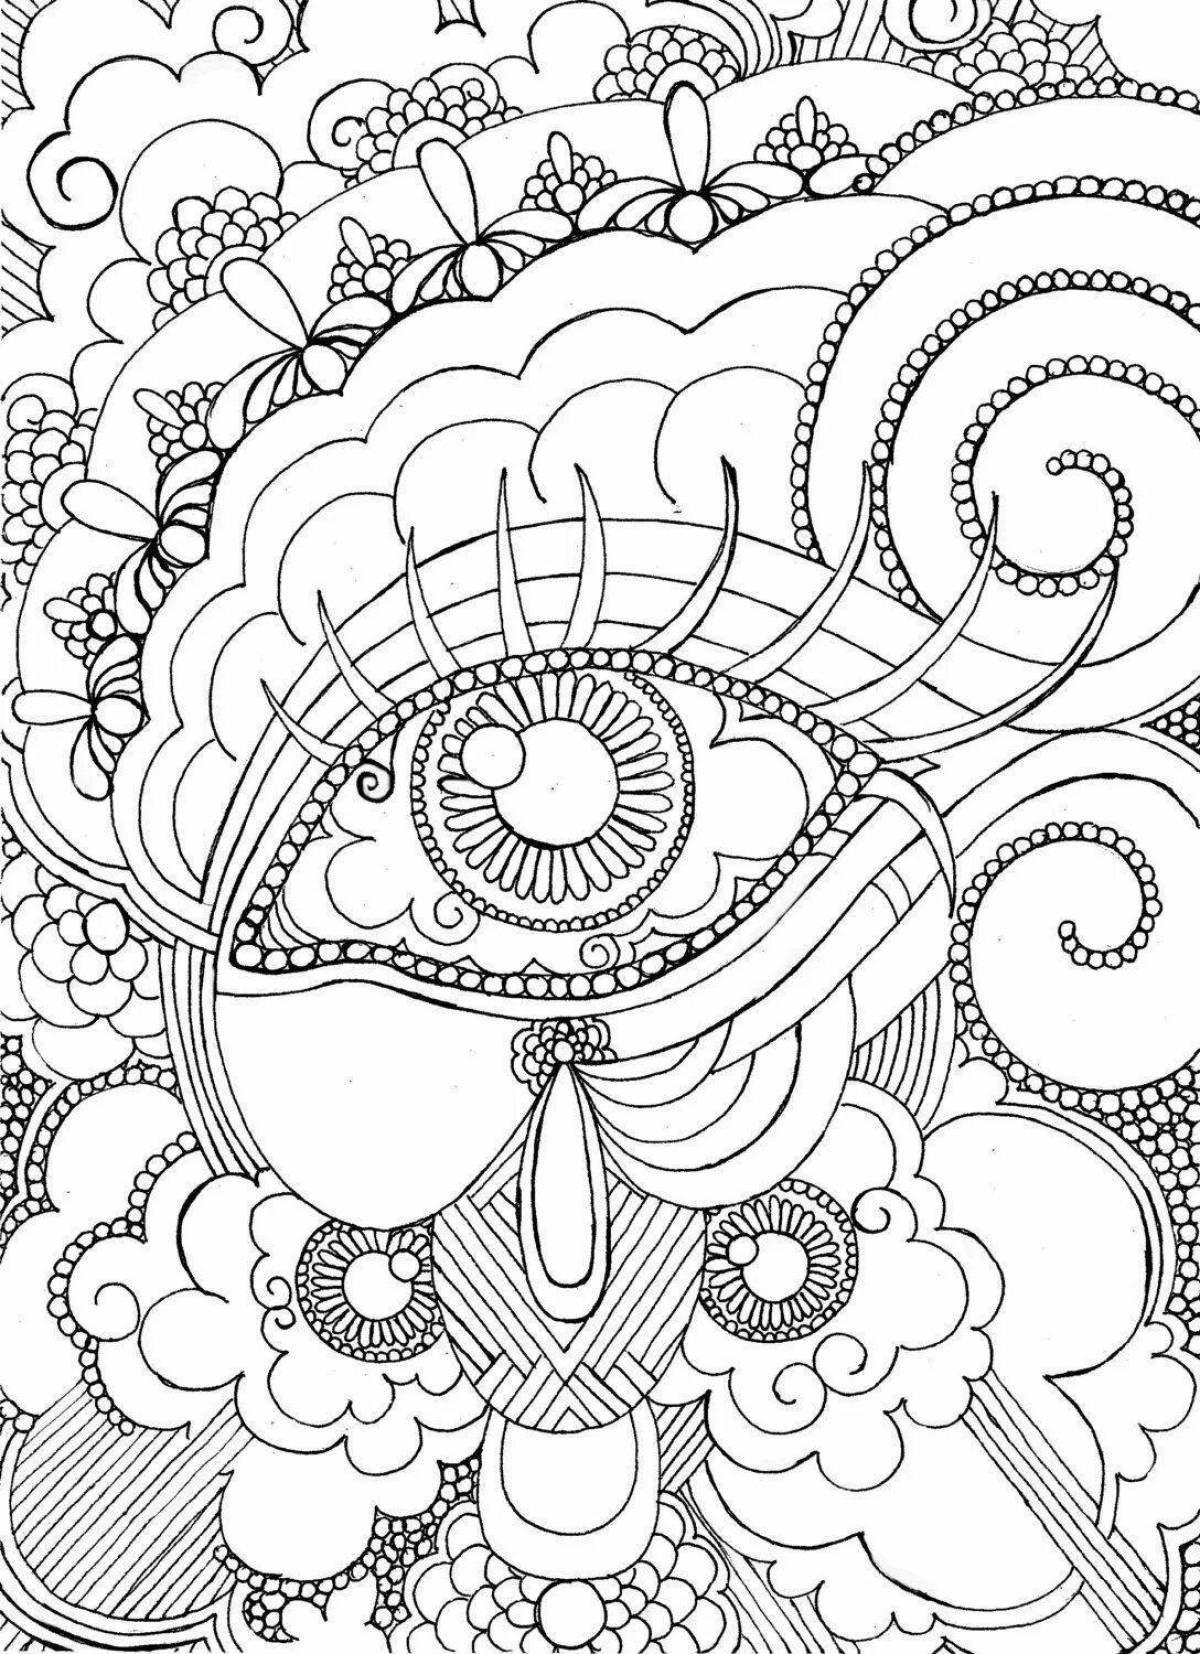 Inspirational psychological coloring book for adults